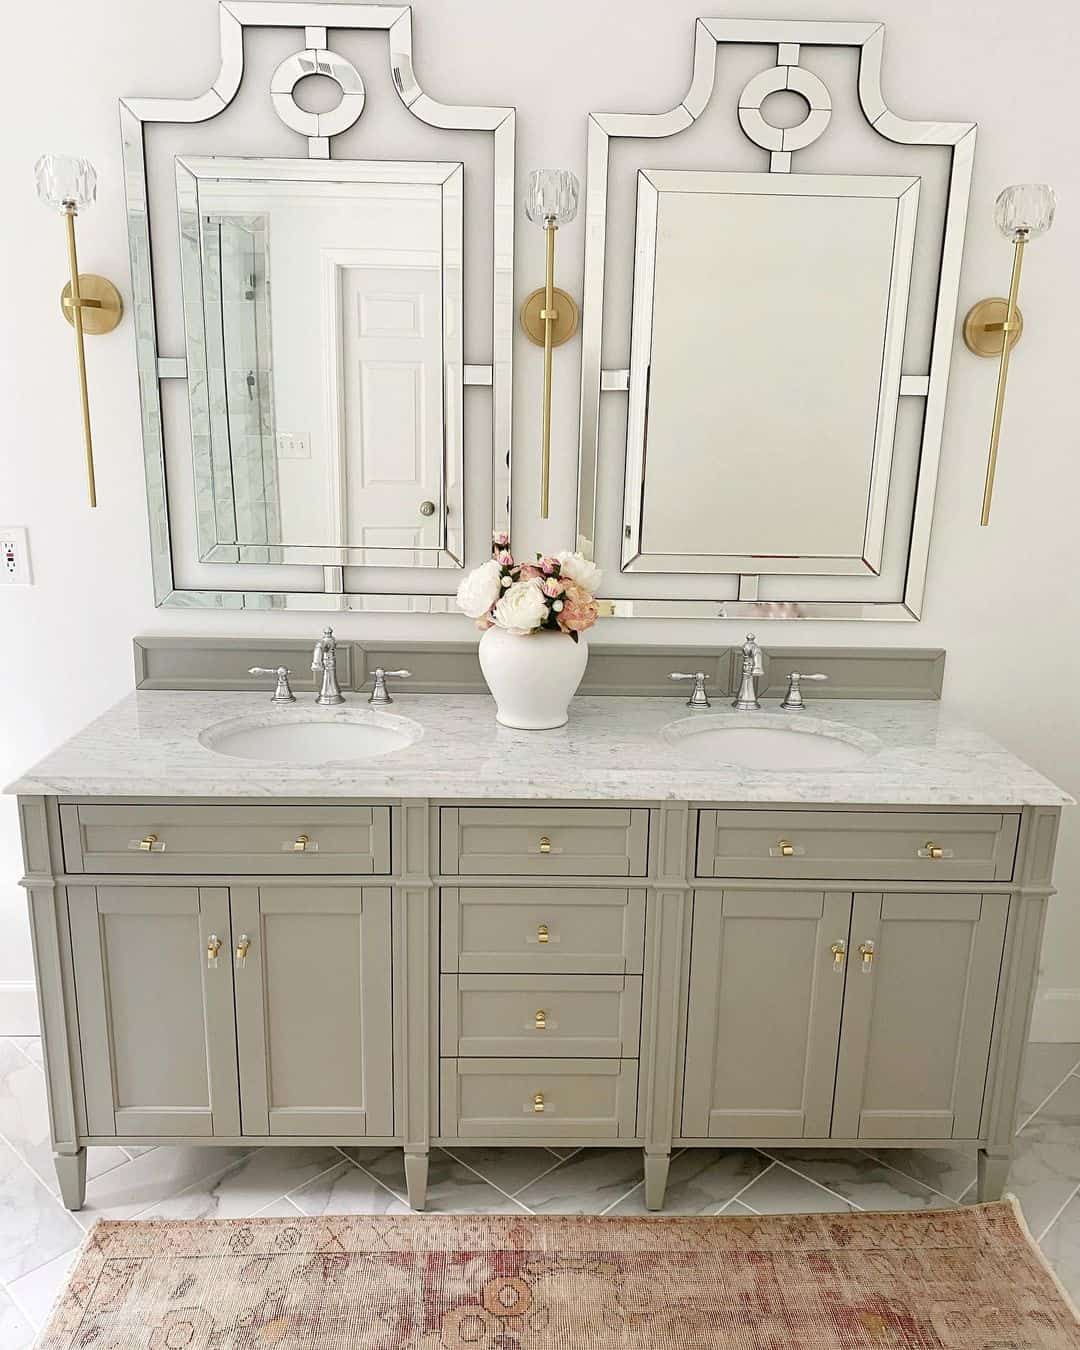 25 Double Vanity Bathroom Ideas for Style and Storage